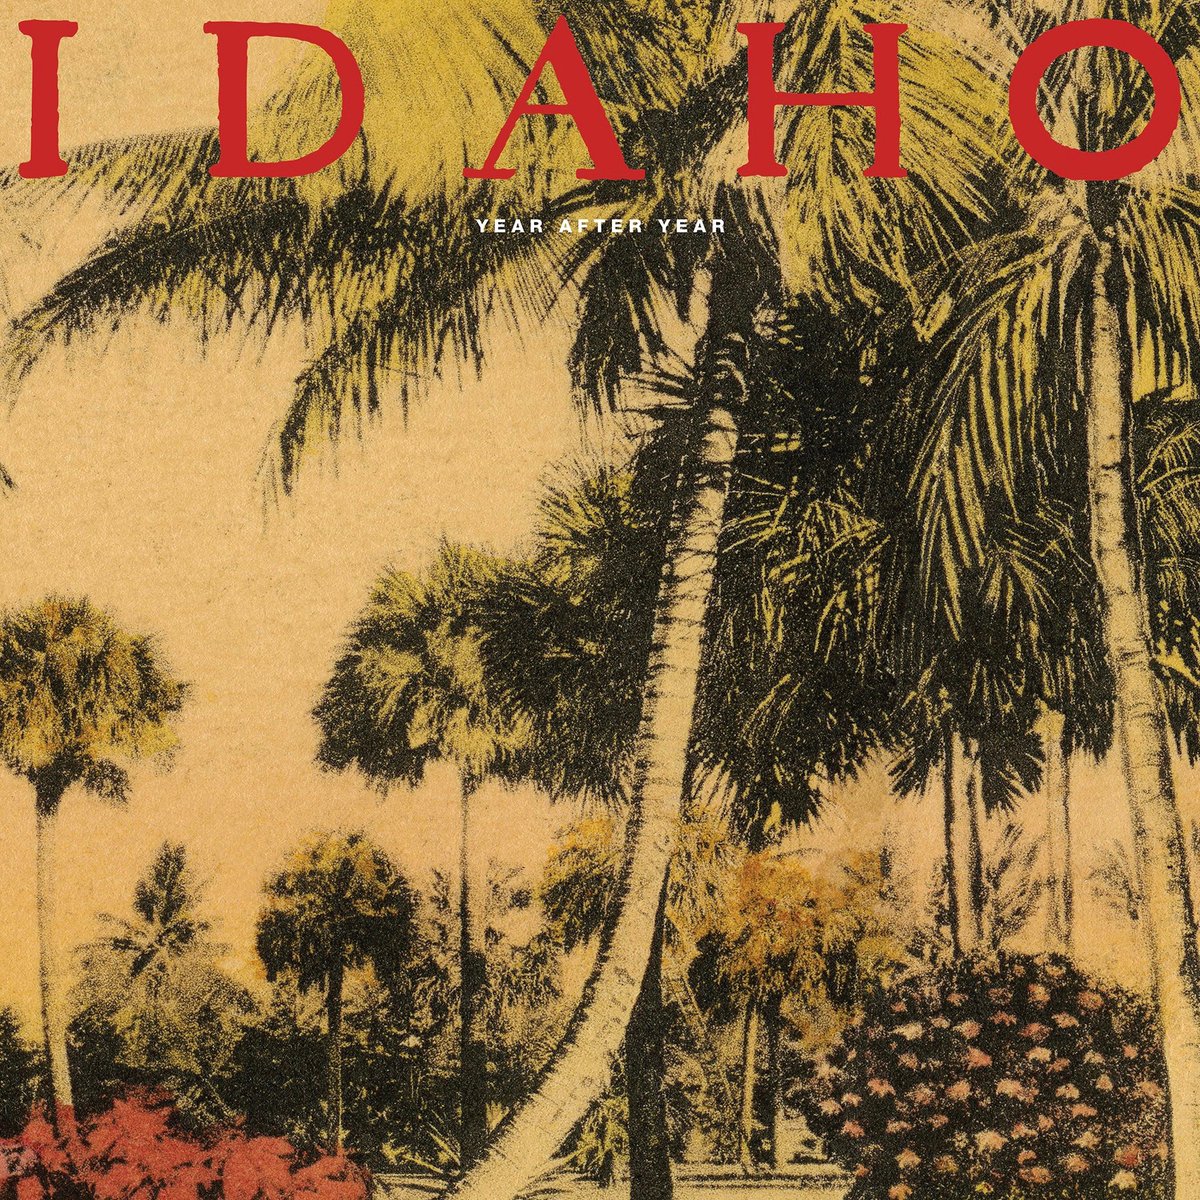 Celebrating thirty years of decorated American rock band Idaho (@IdahoBand)’s debut album Year After Year, released on this day in 1993.✨